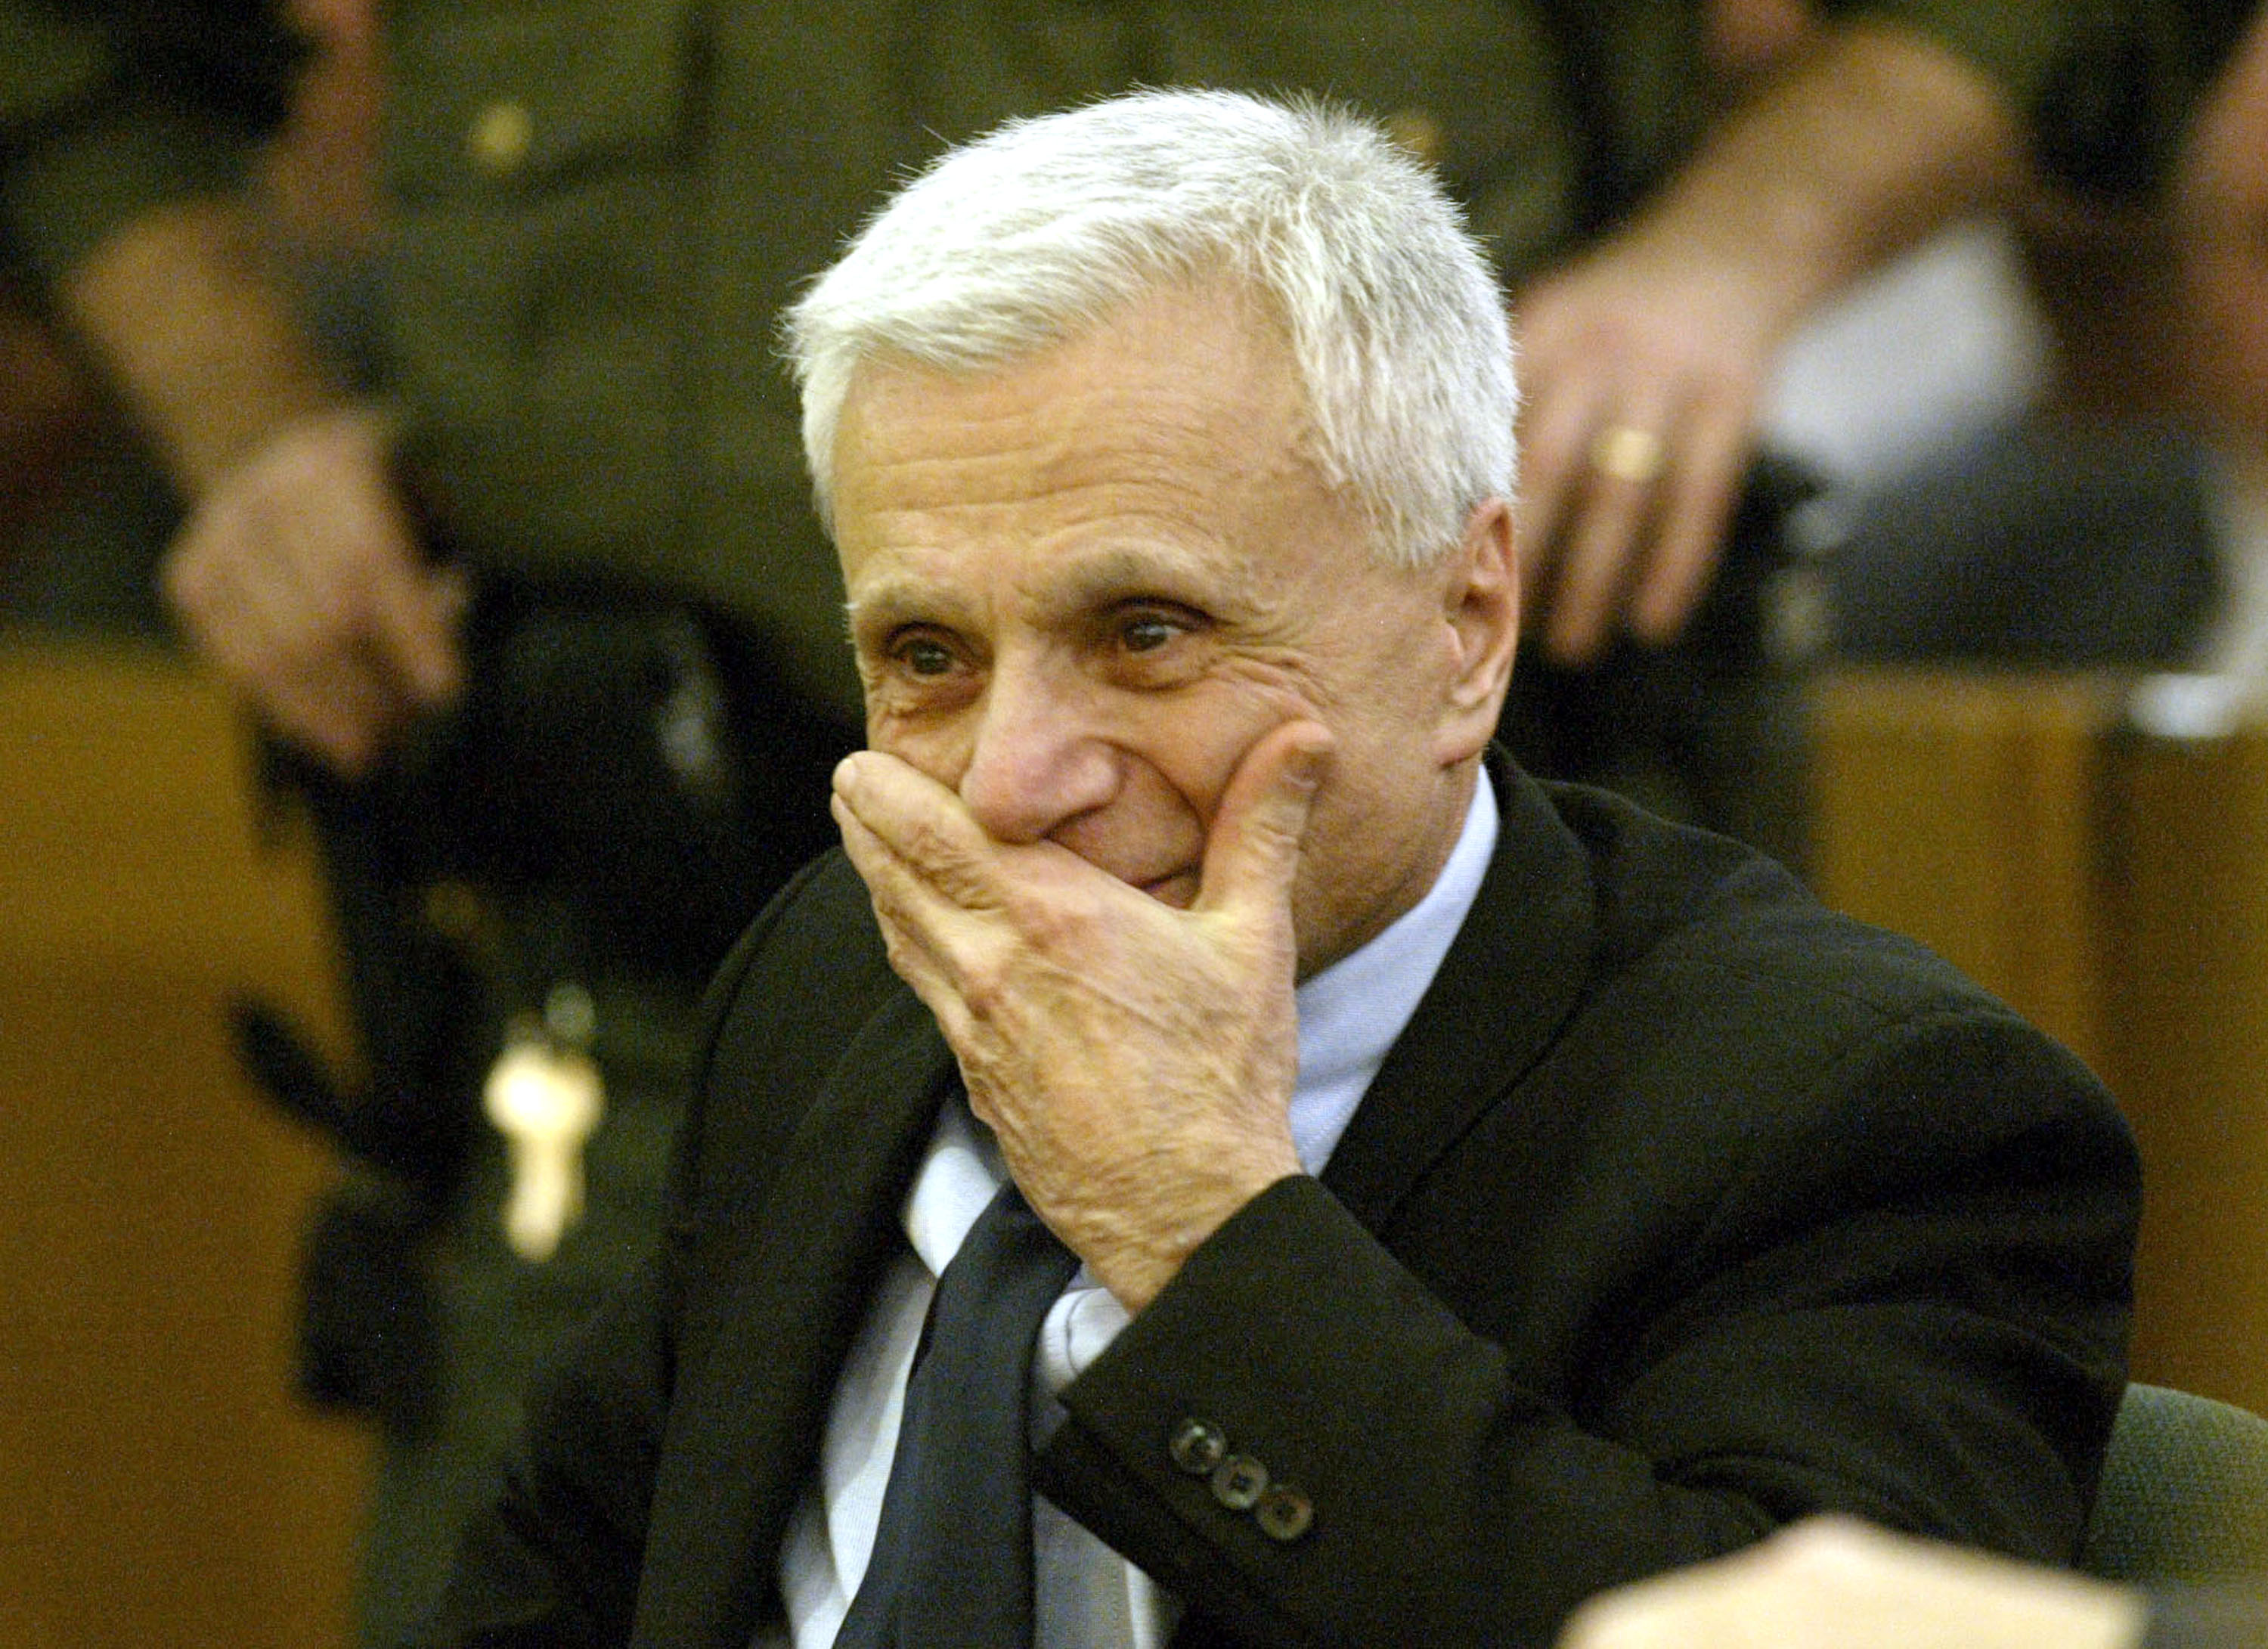 Robert Blake reacts after being acquitted of Bonny Lee Blakley's murder at the Van Nuys Courthouse March 16, 2005 in Van Nuys, California. | Source: Getty Images